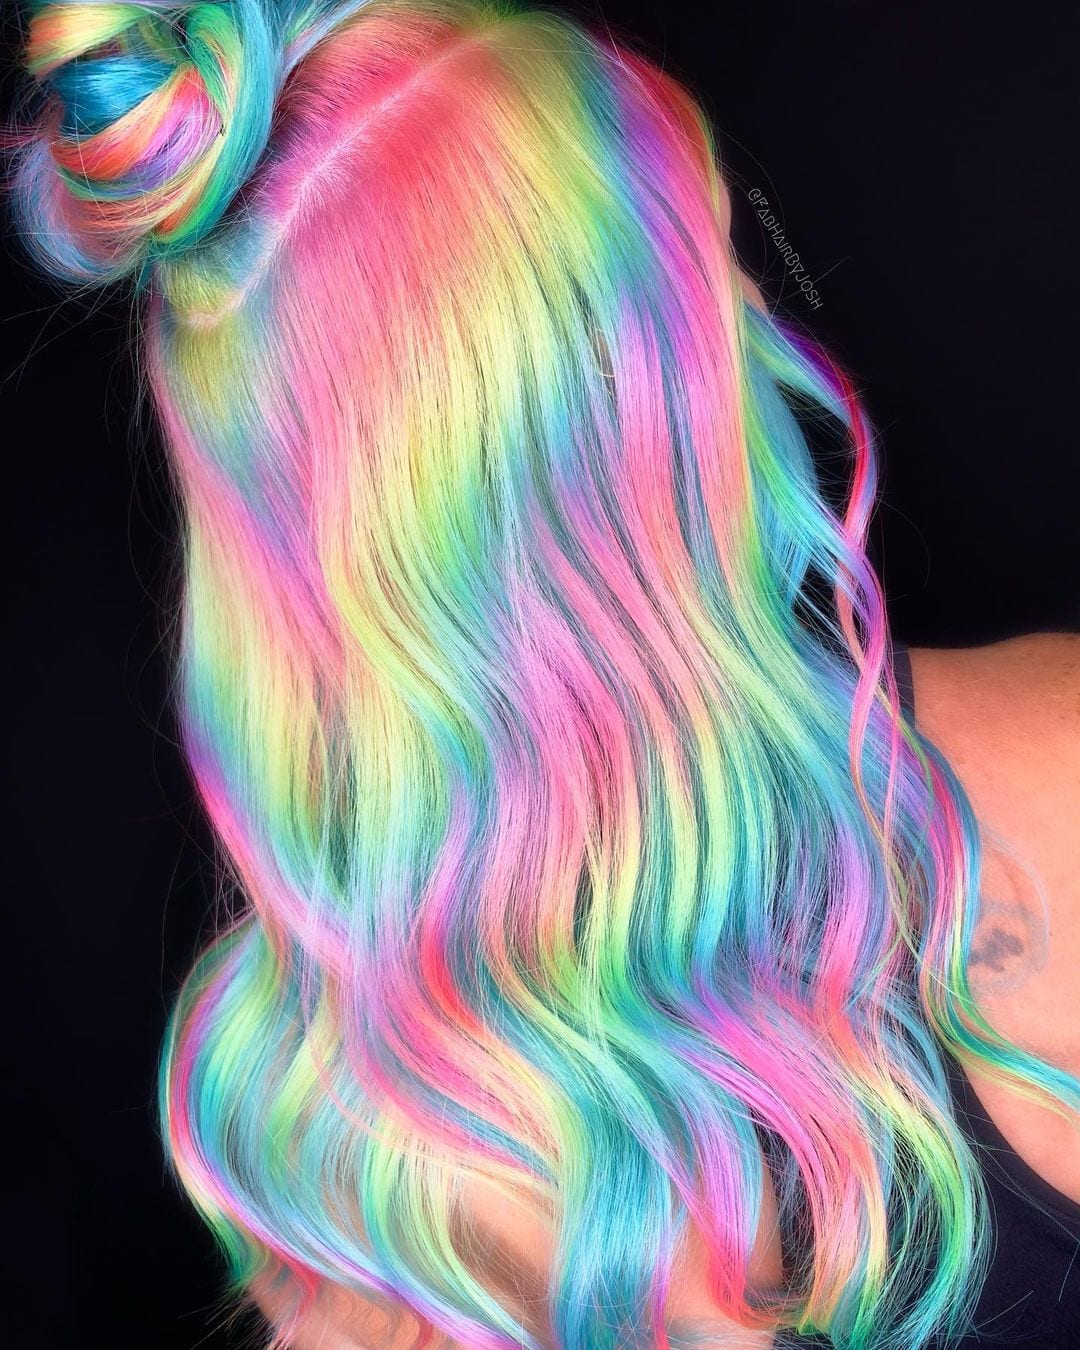 Candyland-esque holographic hair on a woman with a messy bun in a dark room